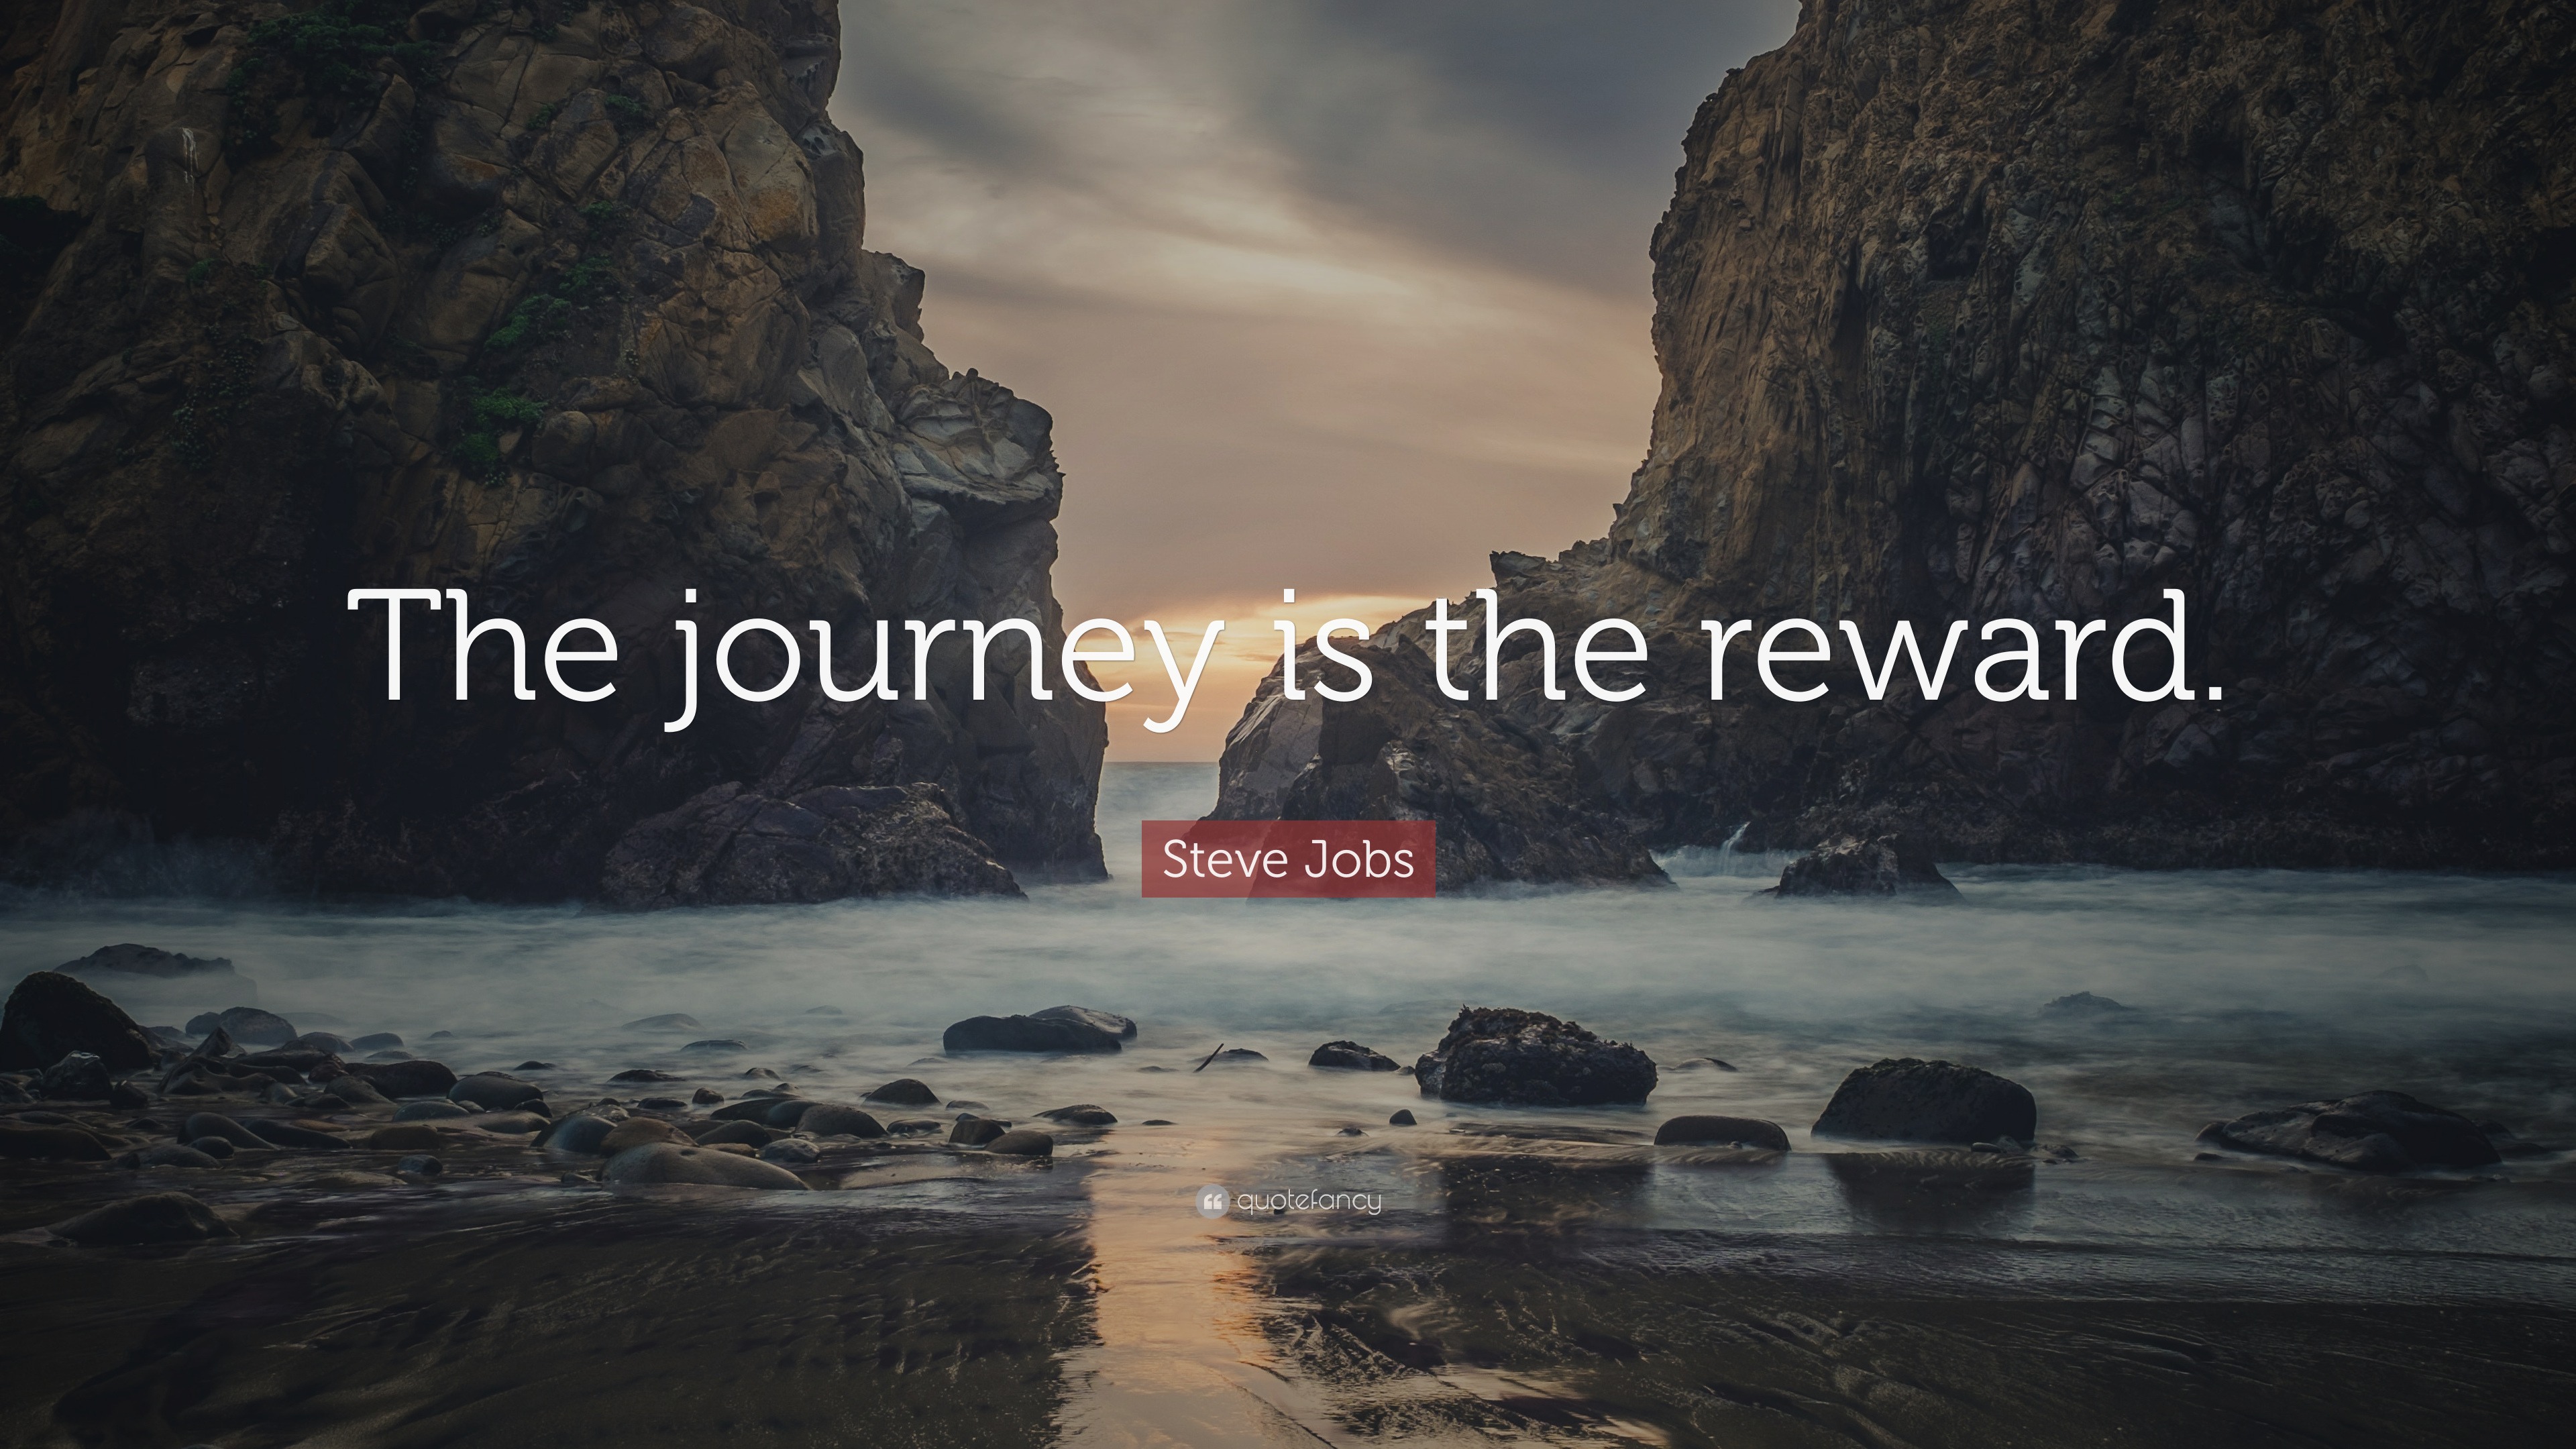 4676778 Steve Jobs Quote The journey is the reward